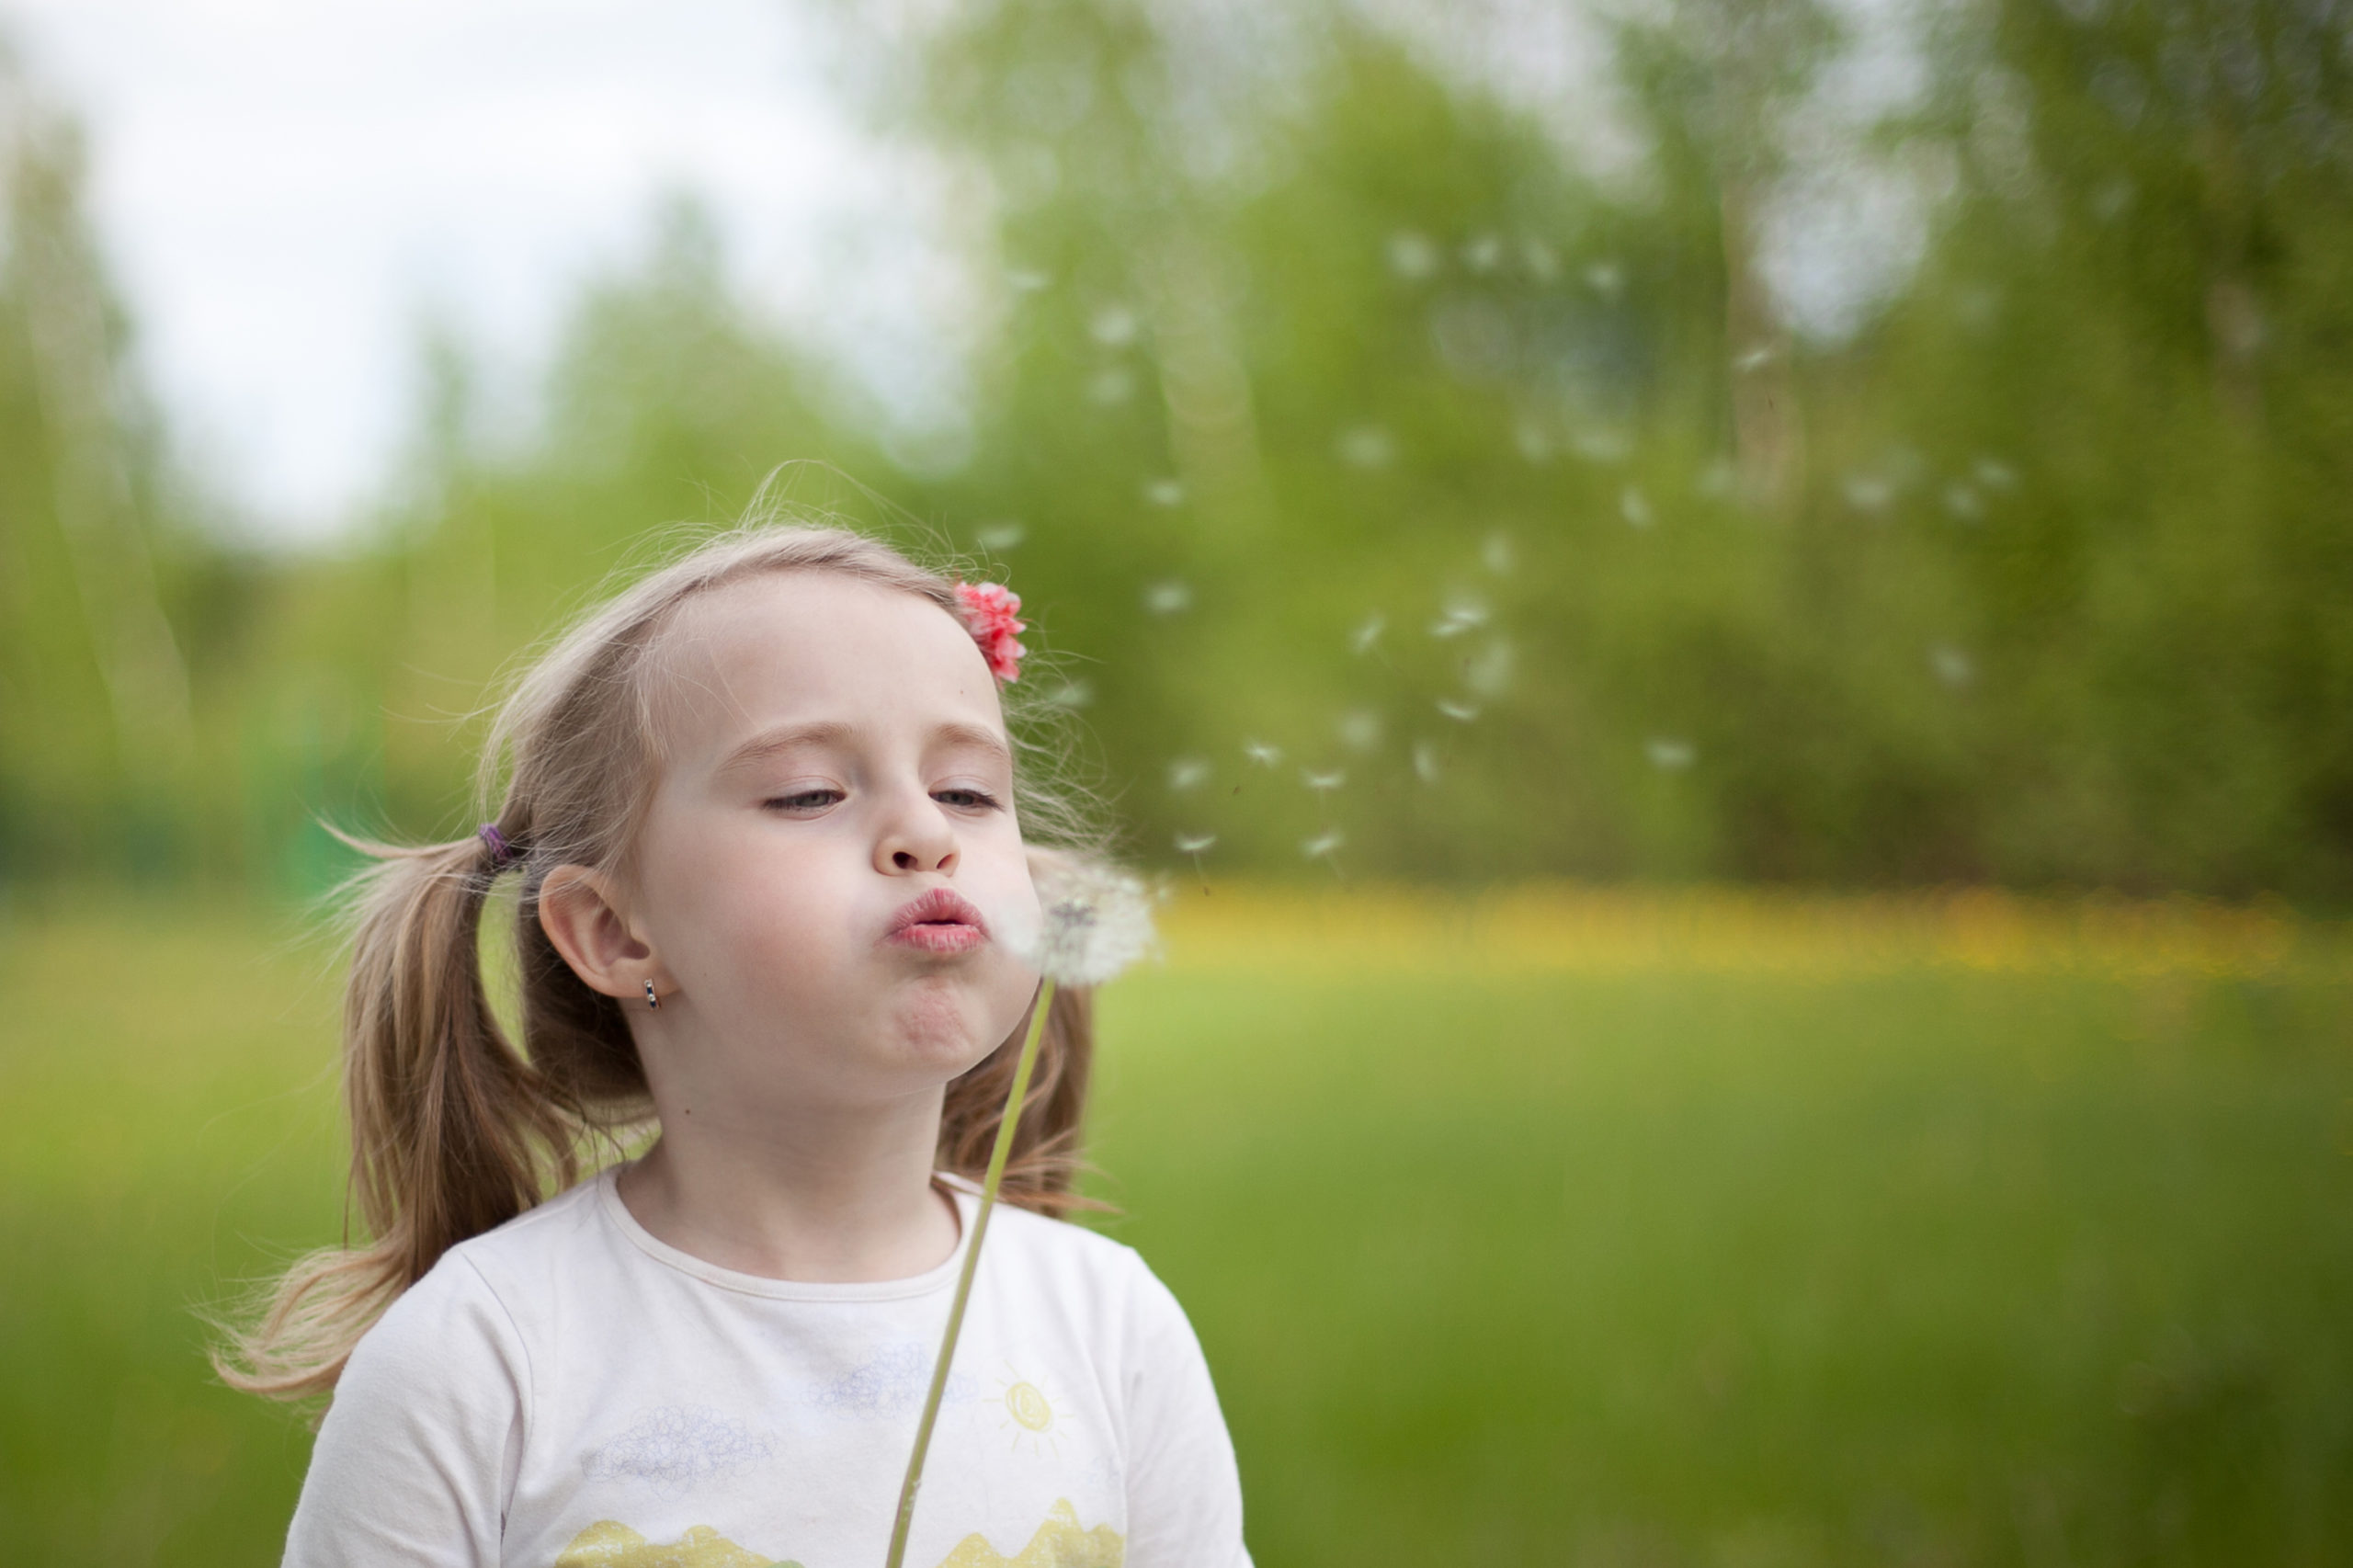 Image of a young girl standing on a grassy field blowing a dandelion